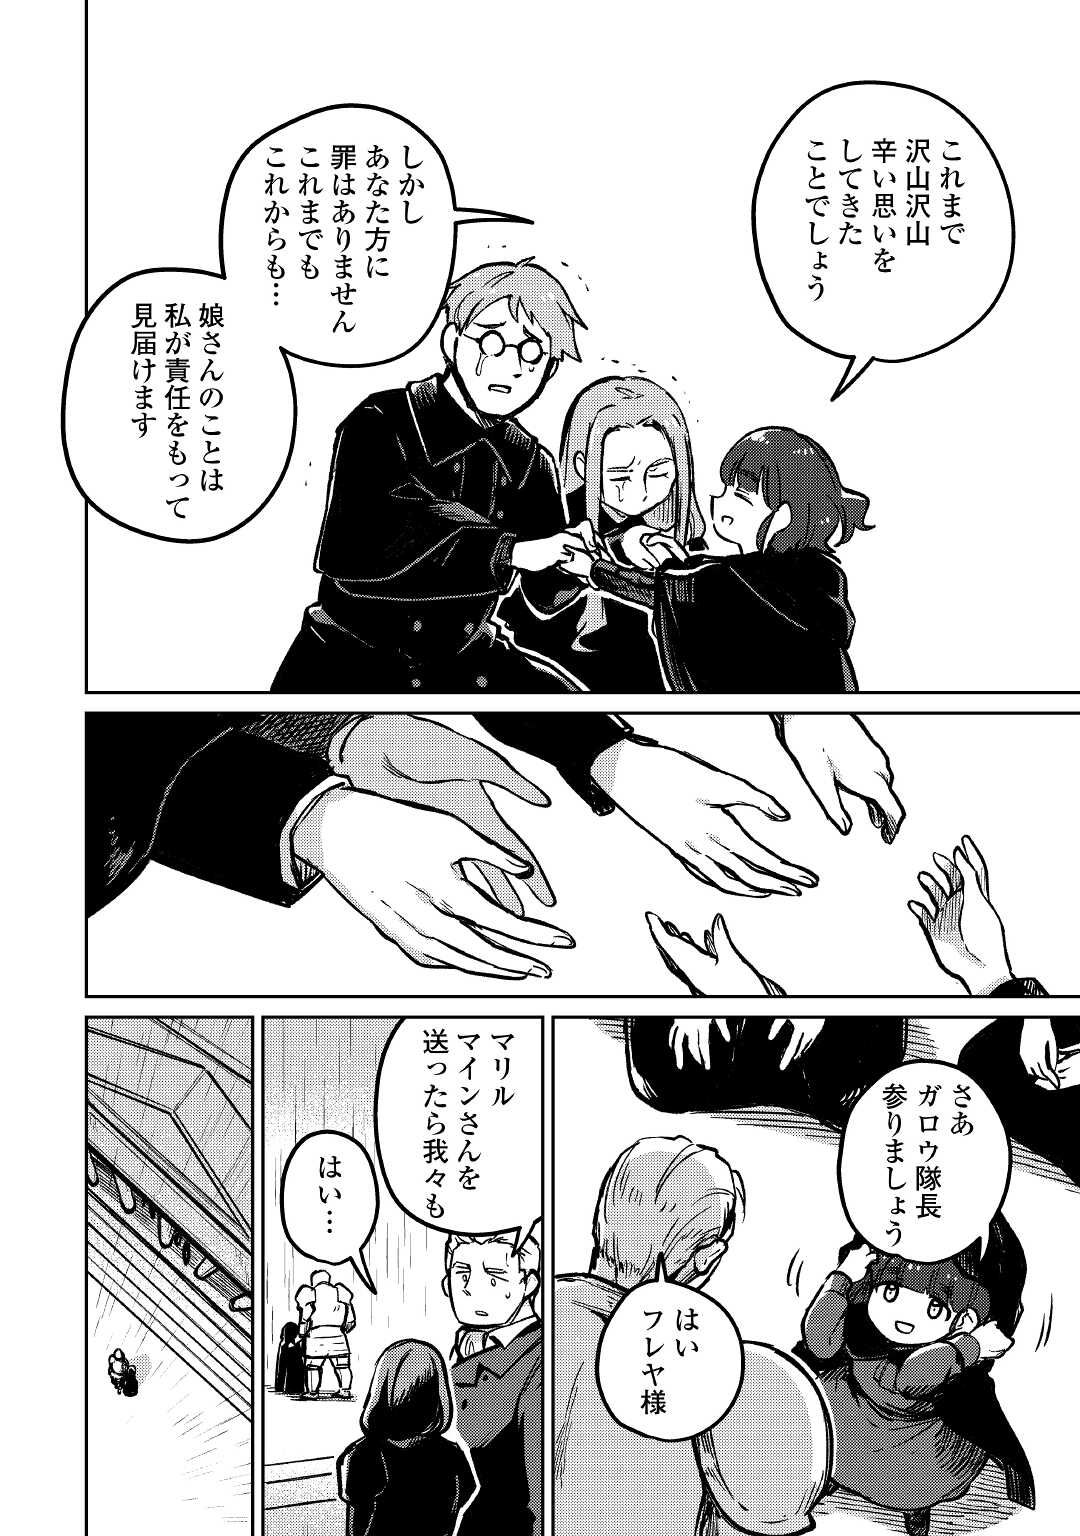 The Former Structural Researcher’s Story of Otherworldly Adventure 第38話 - Page 16